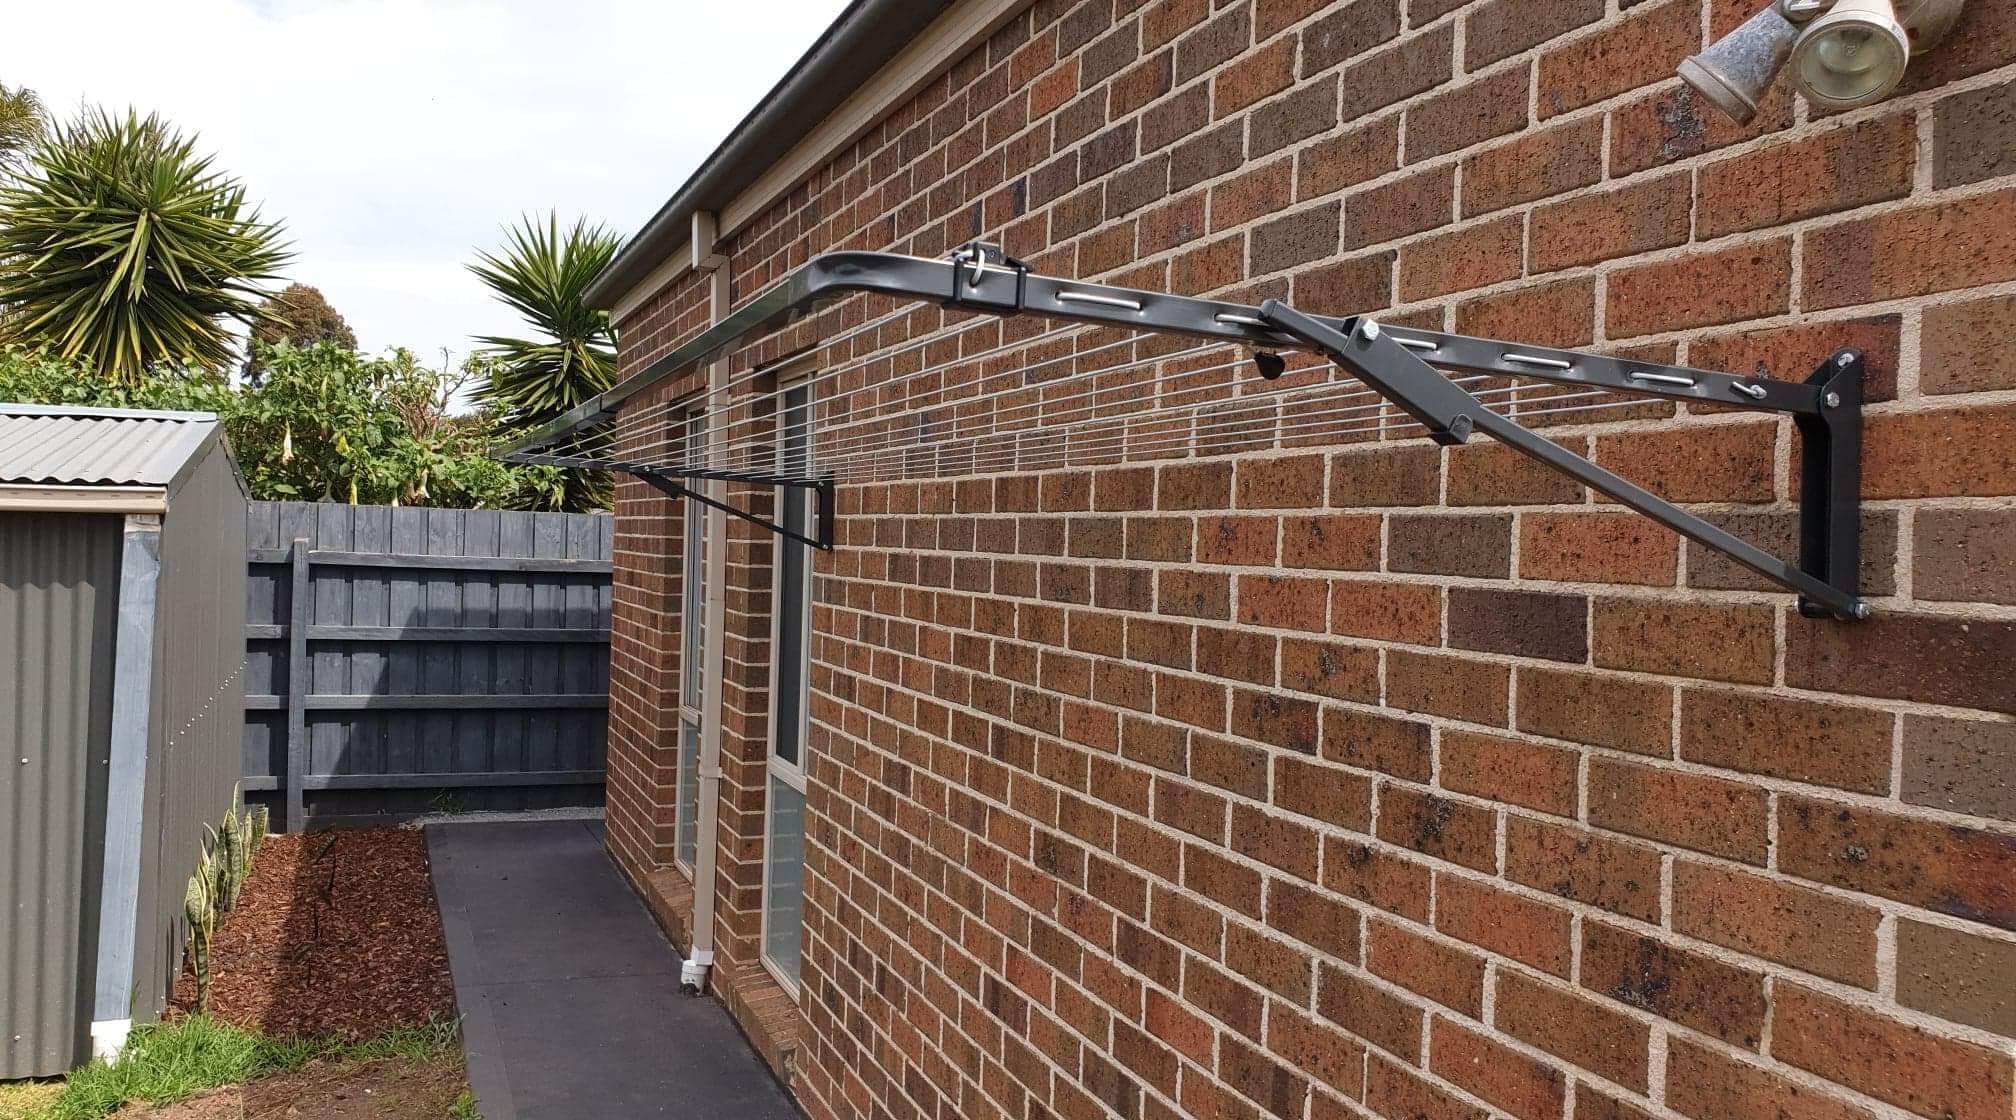 Folding clothesline installation onto brick wall in Melbourne suburb of Greenvale.